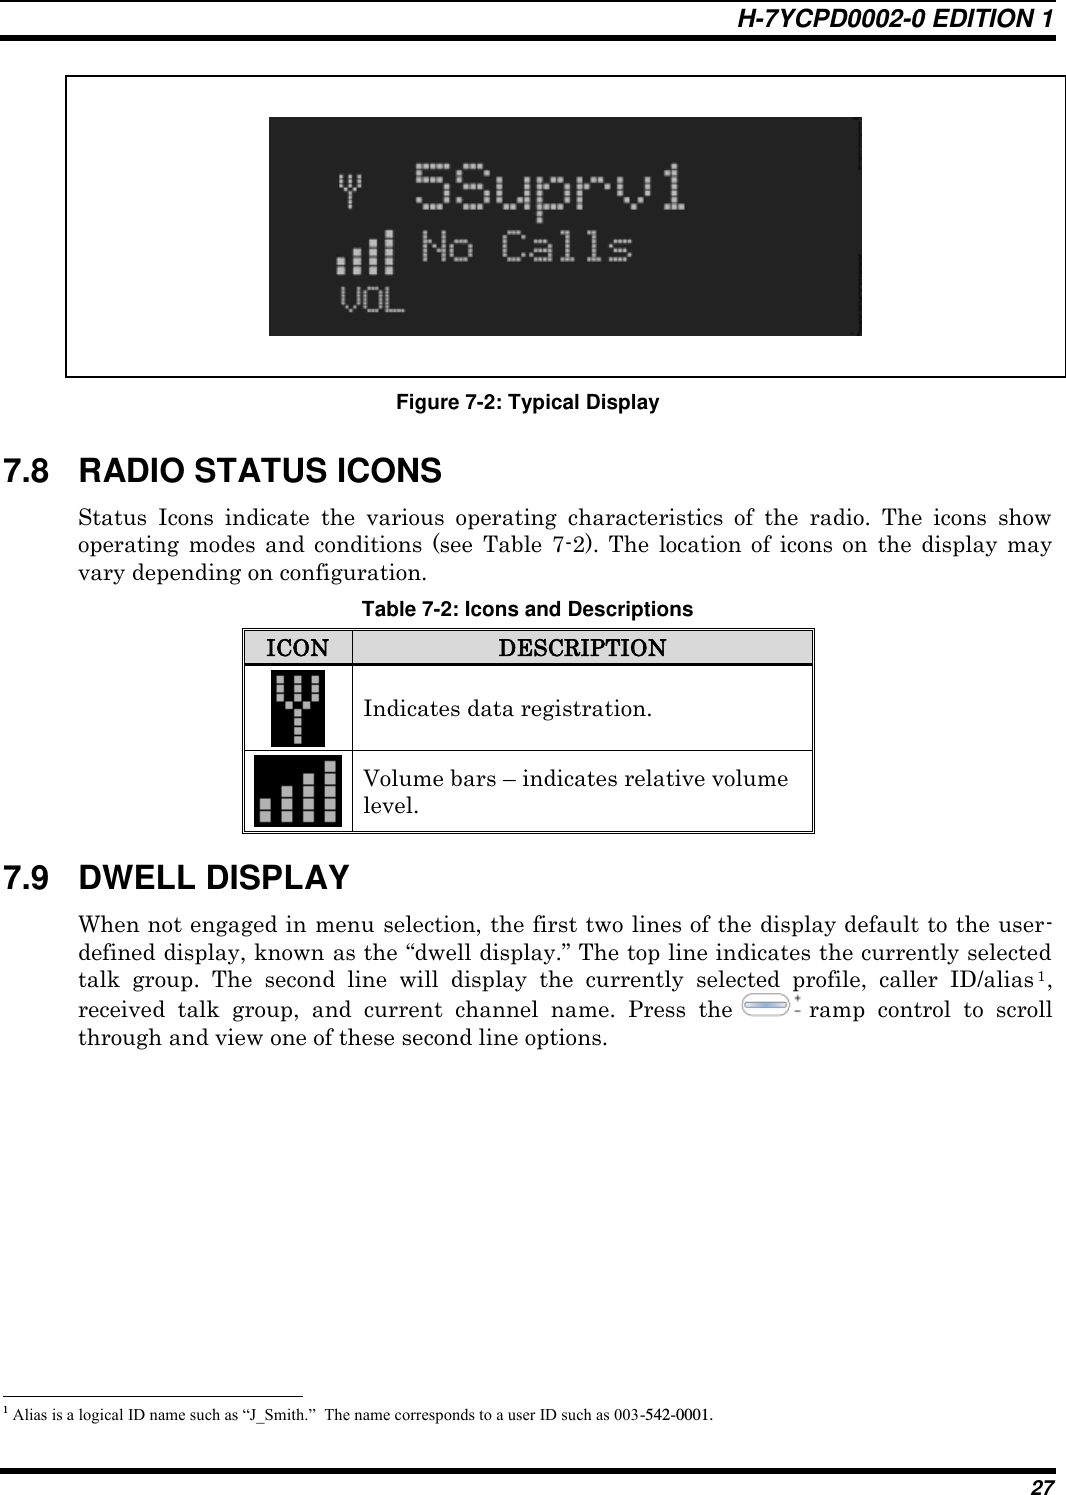 H-7YCPD0002-0 EDITION 1 27    Figure 7-2: Typical Display 7.8  RADIO STATUS ICONS Status  Icons  indicate  the  various  operating  characteristics  of  the  radio.  The  icons  show operating modes and  conditions  (see  Table  7-2). The location  of  icons on the display  may vary depending on configuration. Table 7-2: Icons and Descriptions ICON DESCRIPTION  Indicates data registration.  Volume bars – indicates relative volume level. 7.9  DWELL DISPLAY When not engaged in menu selection, the first two lines of the display default to the user-defined display, known as the “dwell display.” The top line indicates the currently selected talk  group.  The  second  line  will  display  the  currently  selected  profile,  caller  ID/alias 1, received  talk  group,  and  current  channel  name.  Press  the   ramp  control  to  scroll through and view one of these second line options.                                                             1 Alias is a logical ID name such as “J_Smith.”  The name corresponds to a user ID such as 003-542-0001. 